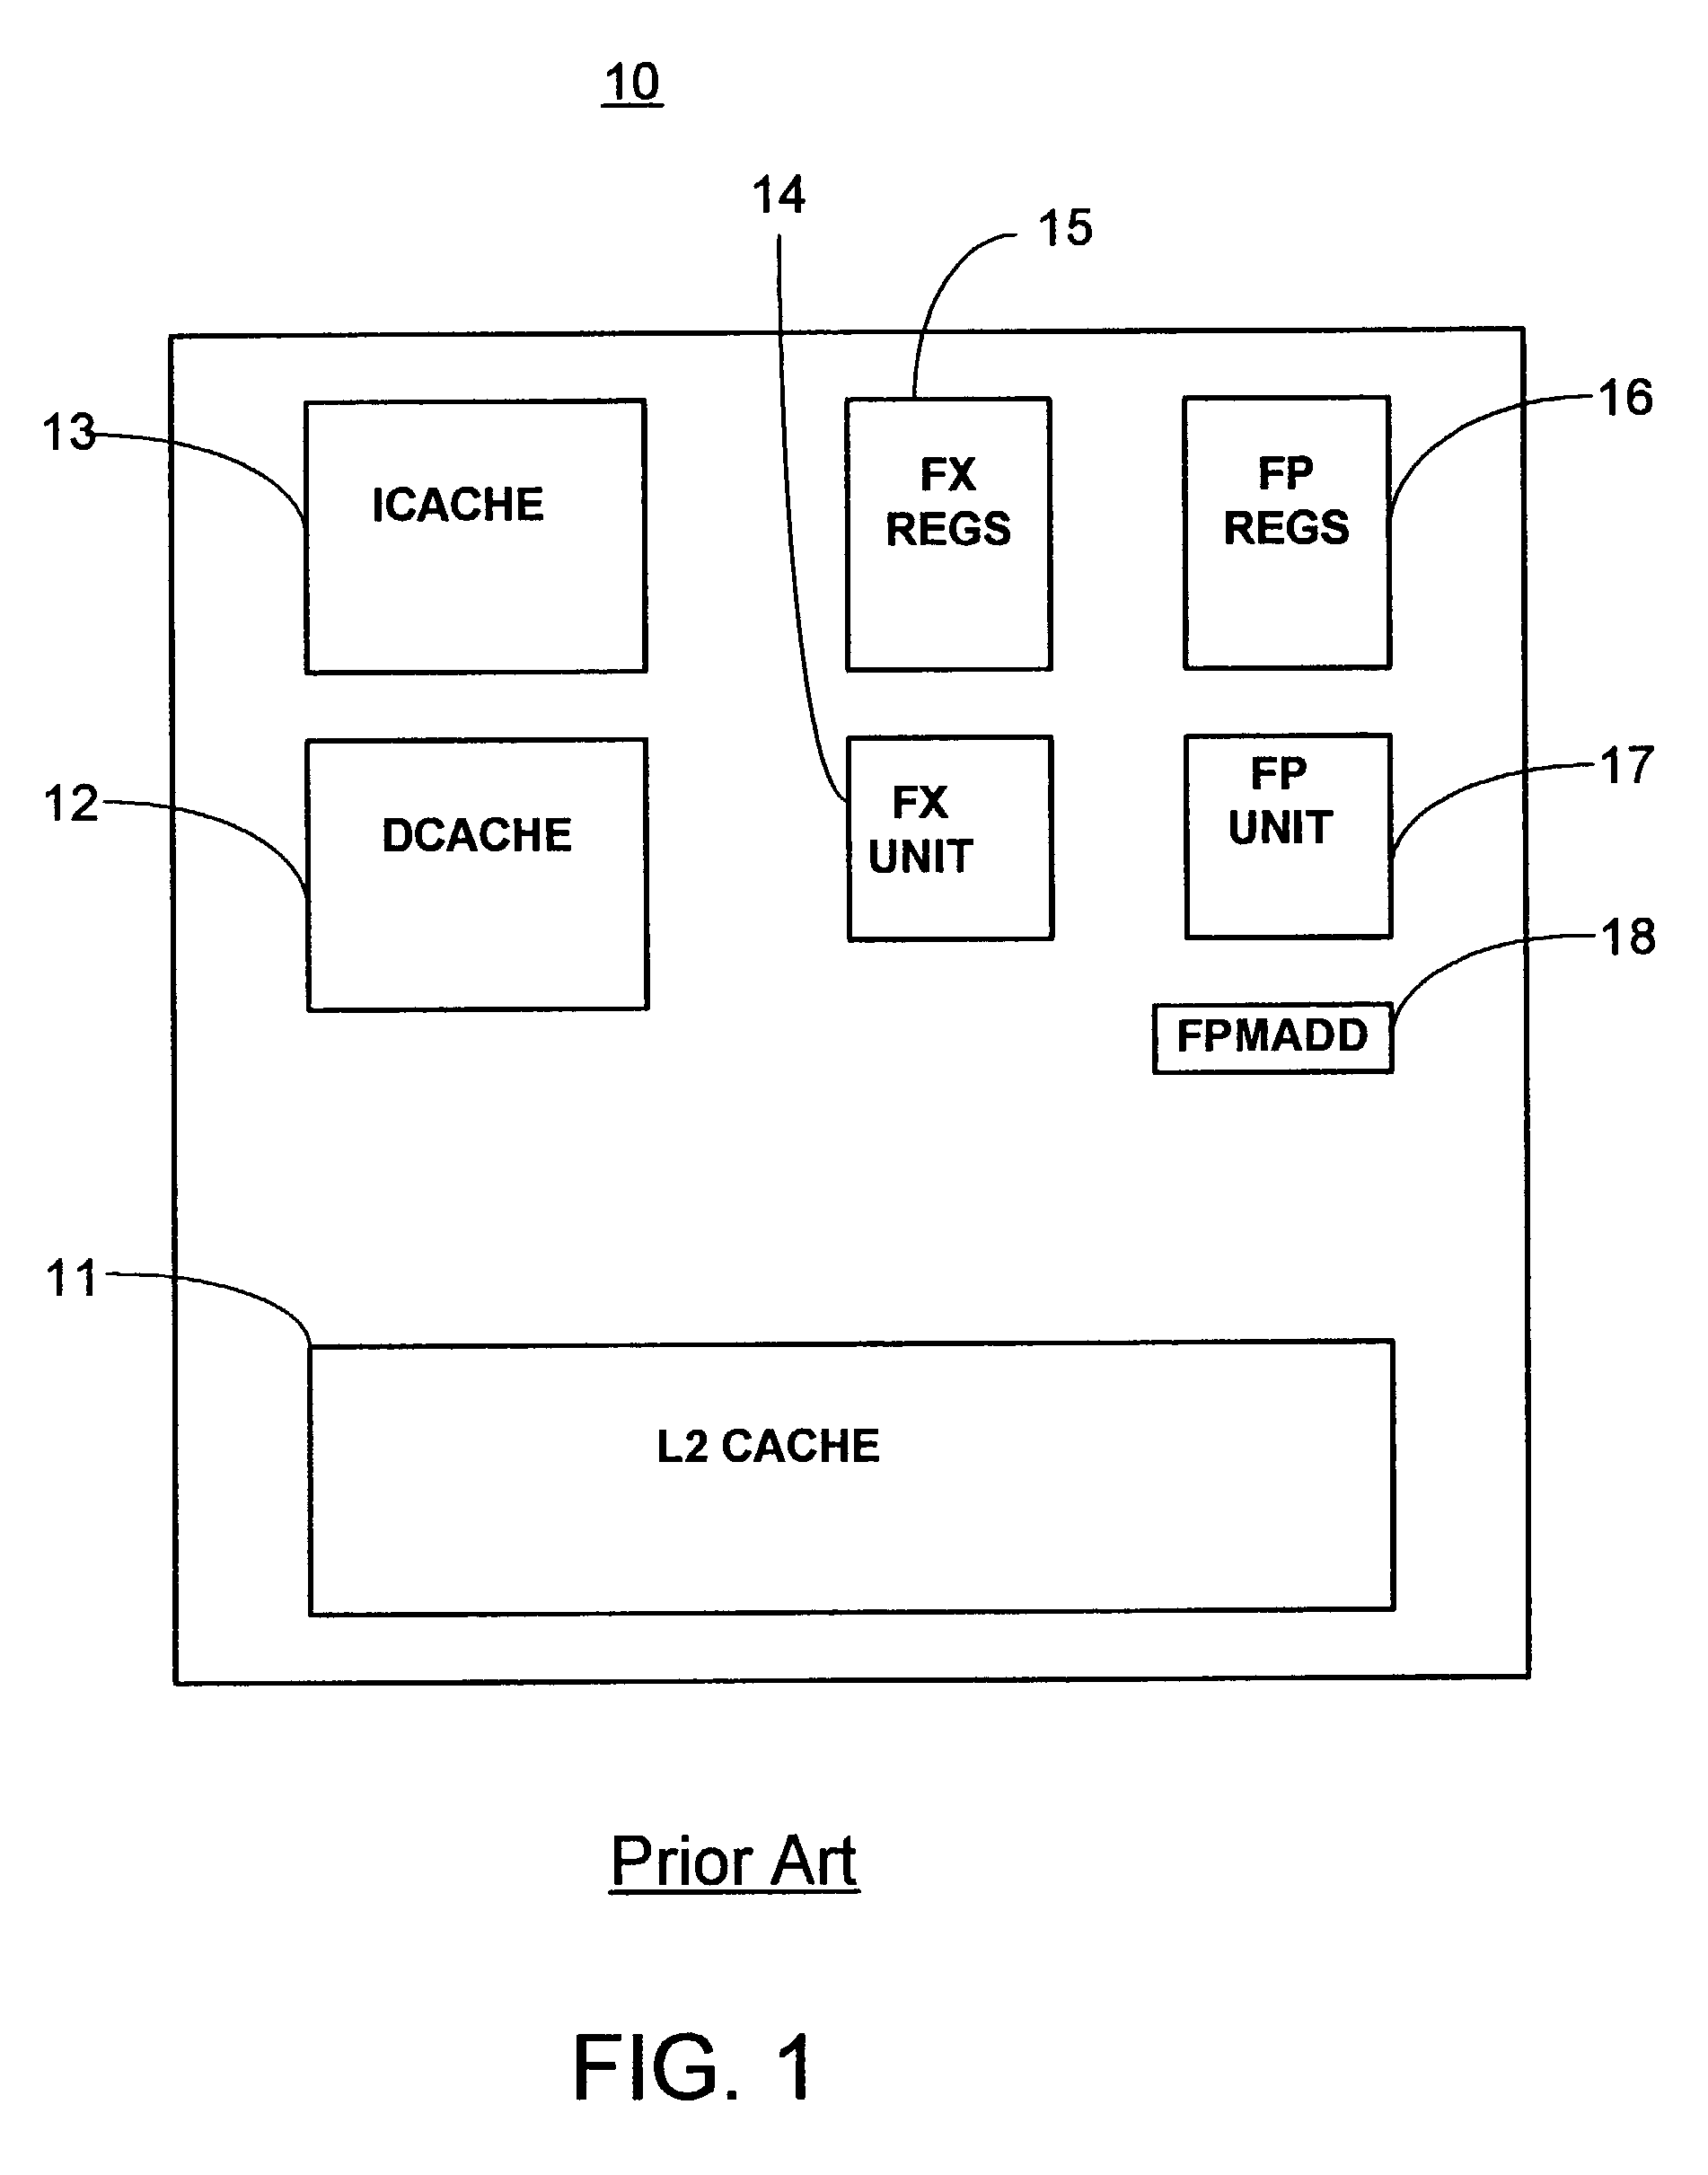 Method and apparatus to eliminate processor core hot spots